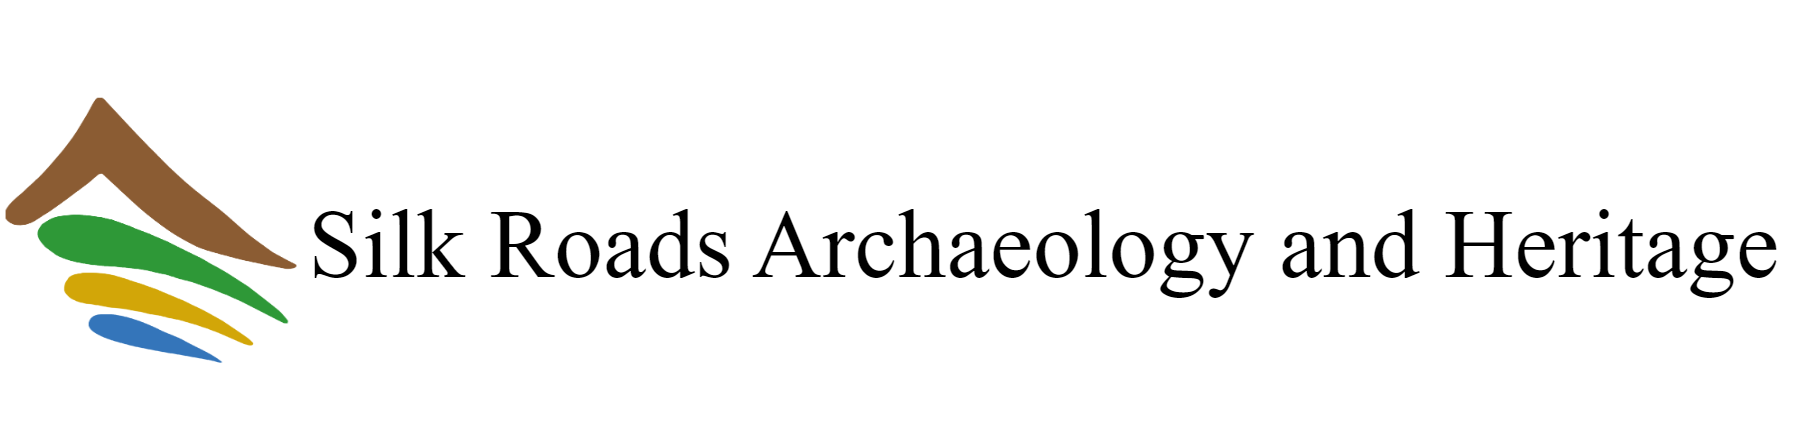 Silk Roads Archaeology and Heritage logo